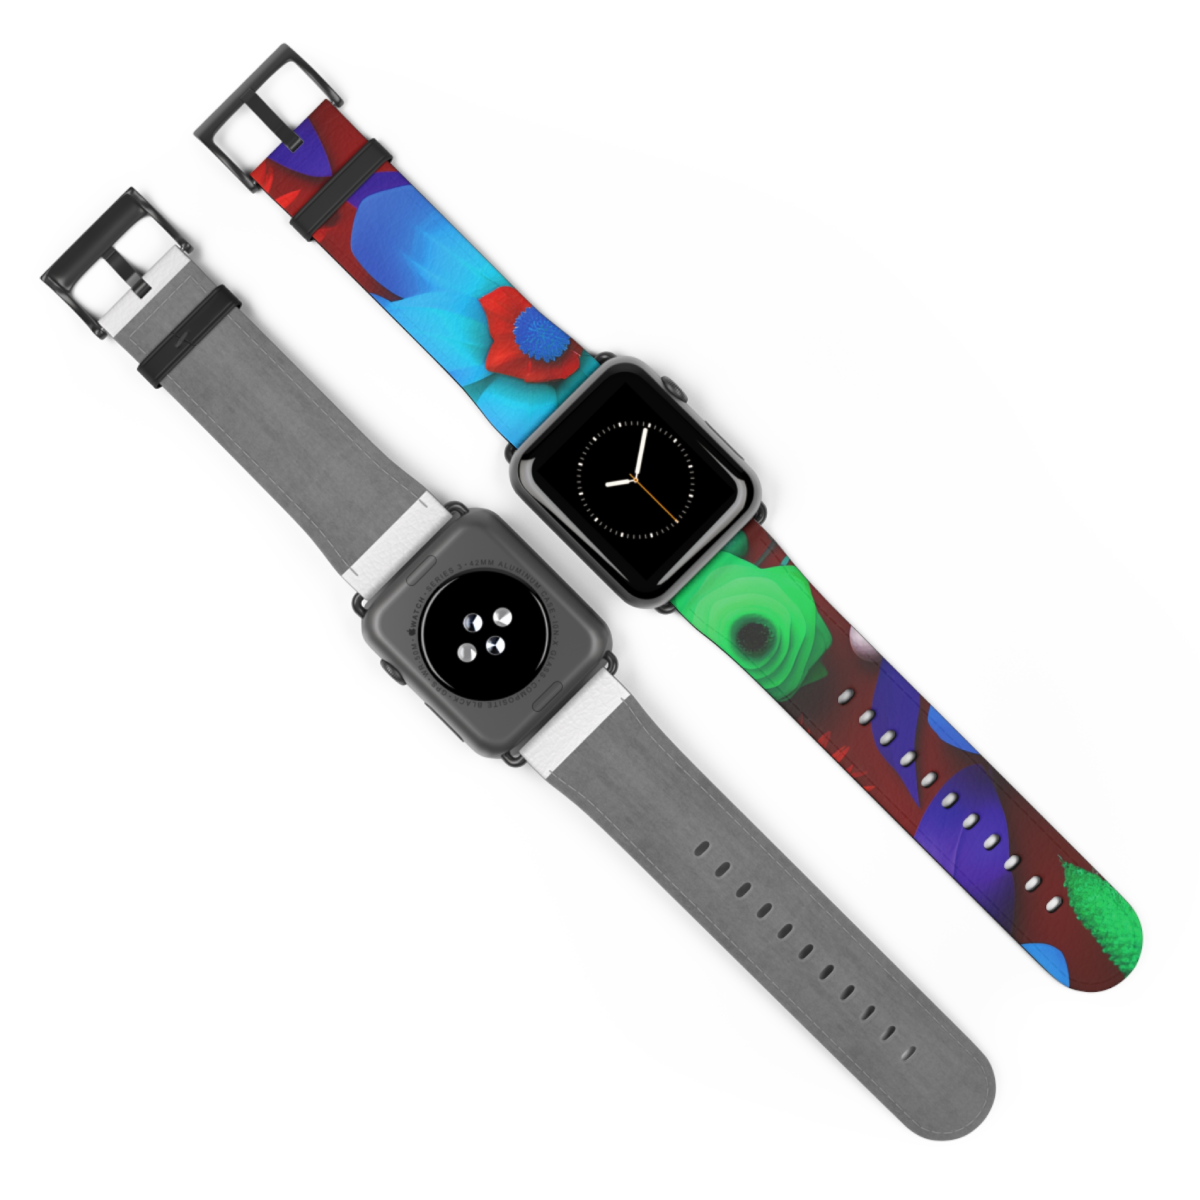 Apple Watch Series 1-9 & SE Faux Leather Band - Floral Fiesta